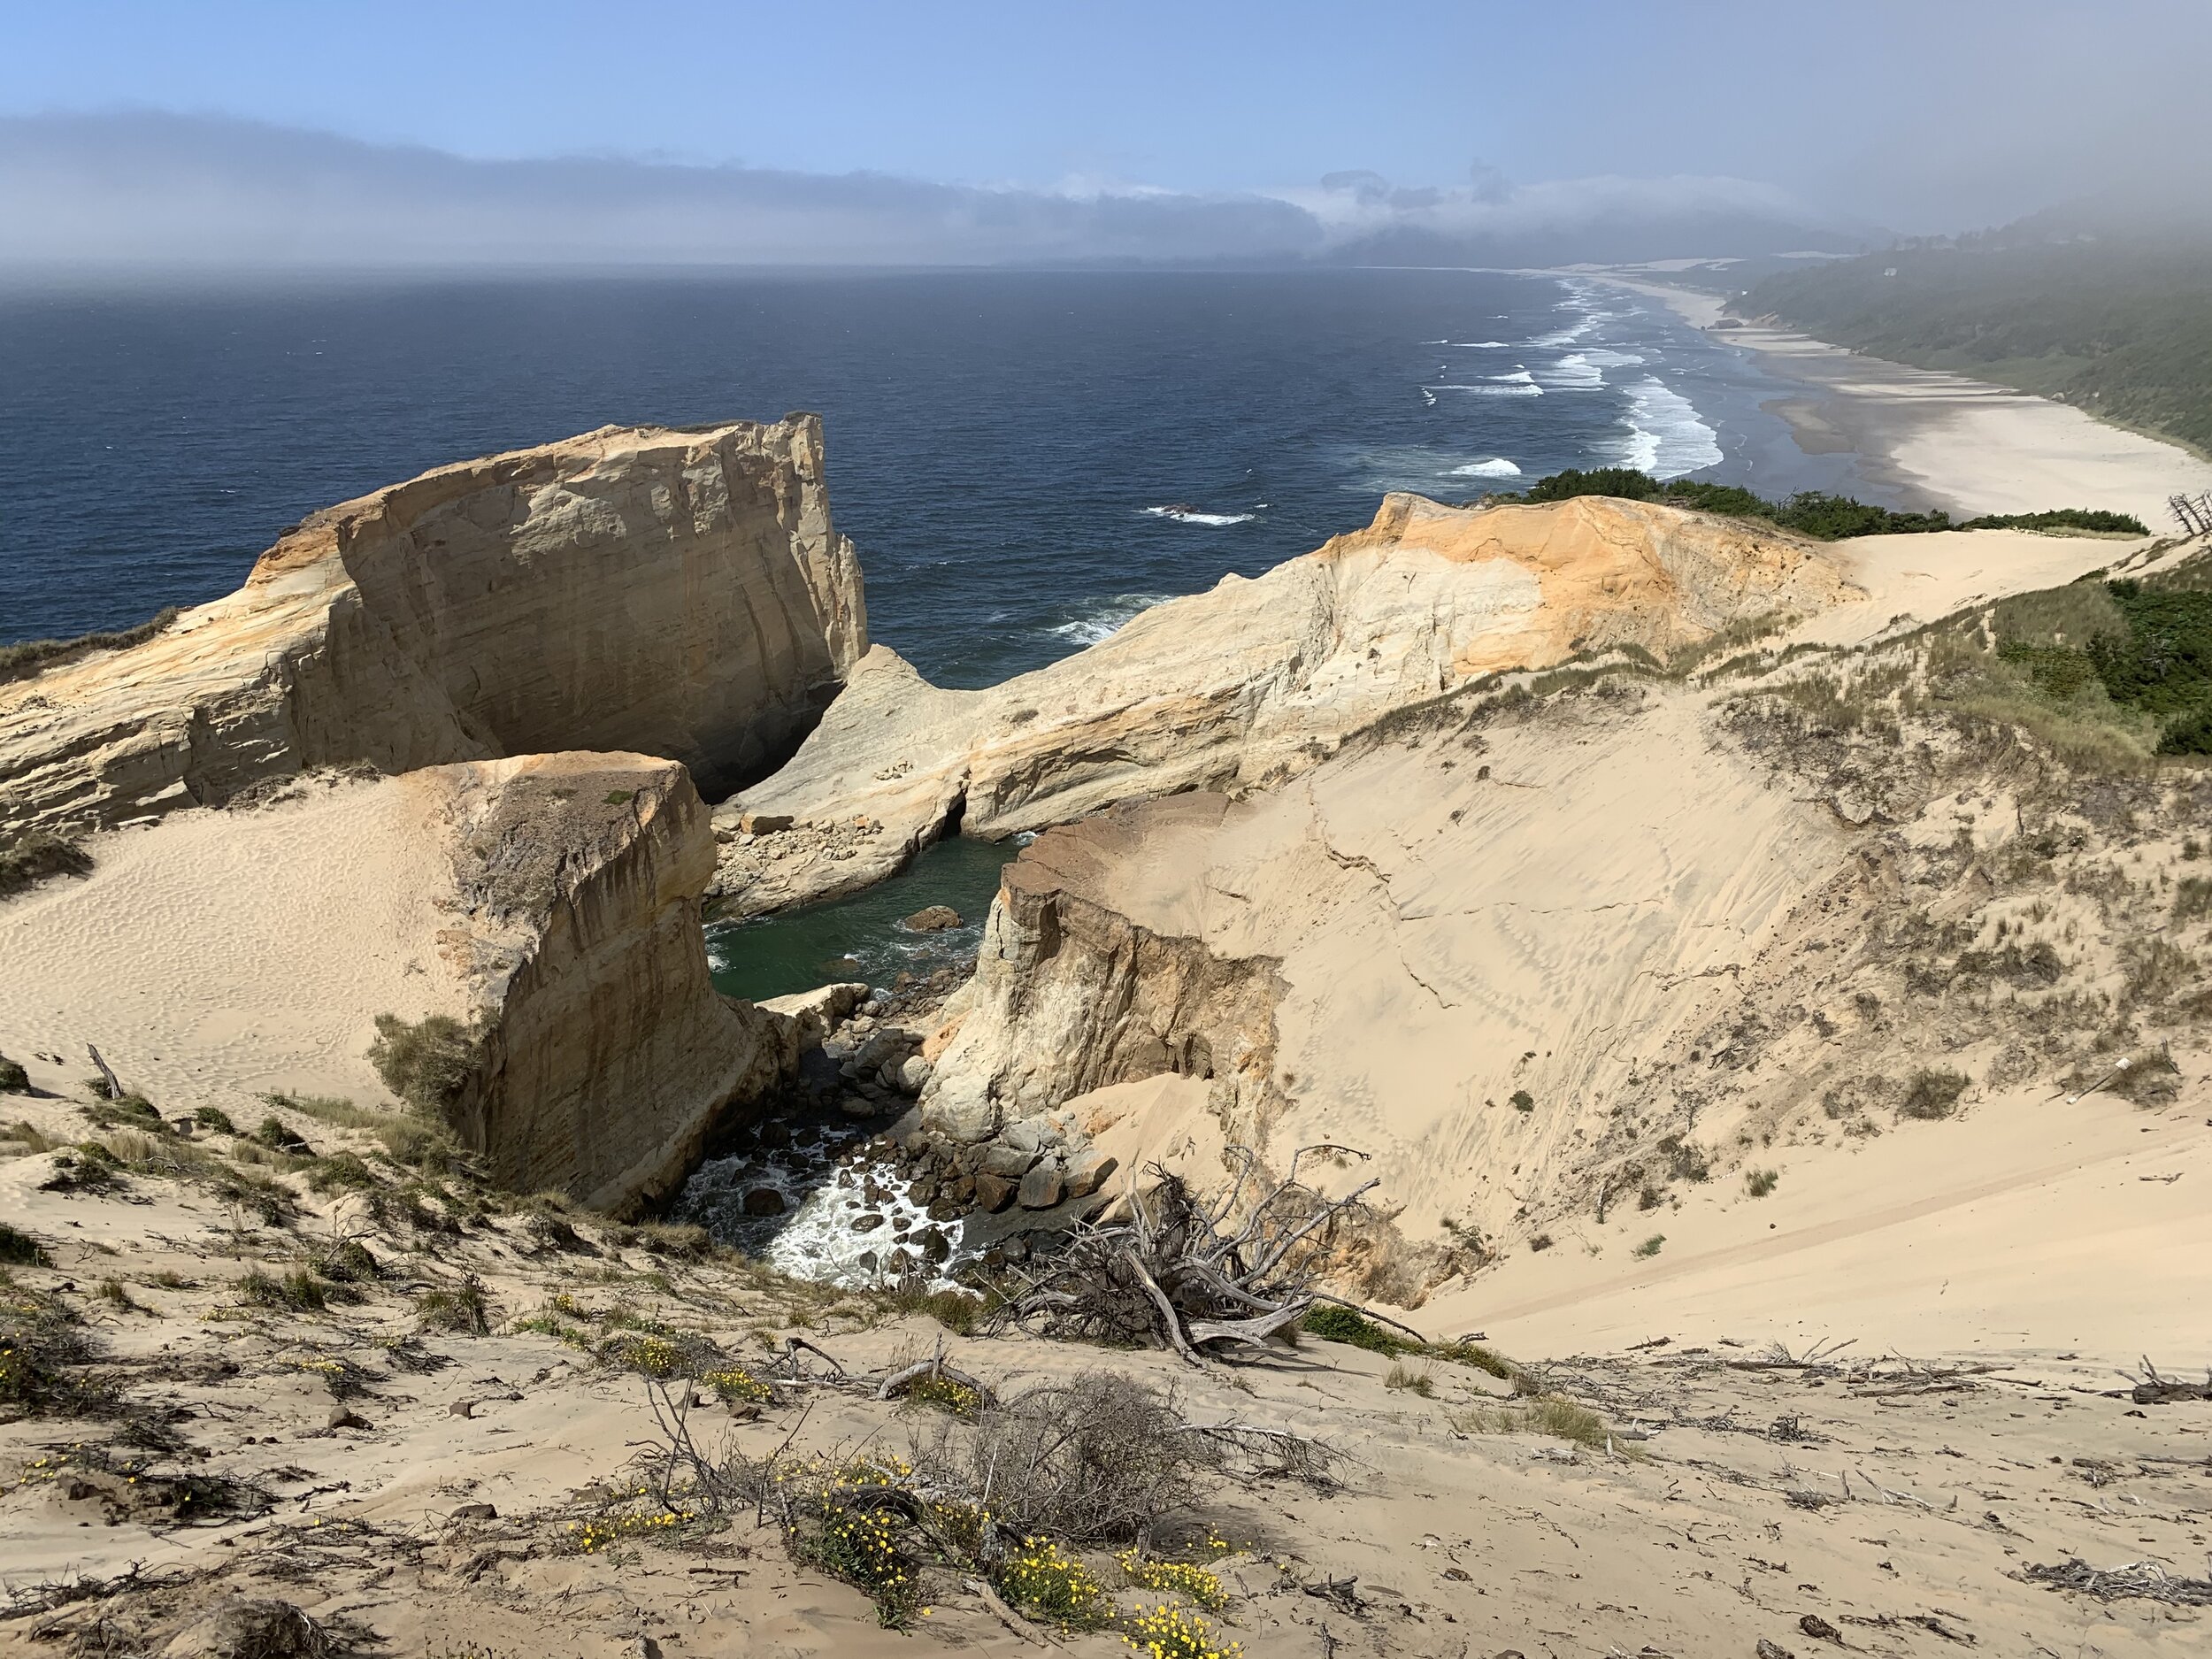  At Pacific City Beach, the rocks and sand dunes were the biggest we’d seen. Craig and Curtis climbed up the dune to look out over the ocean. Craig took this photo looking north up the coast. The scene of people going up and down the enormous dune wa